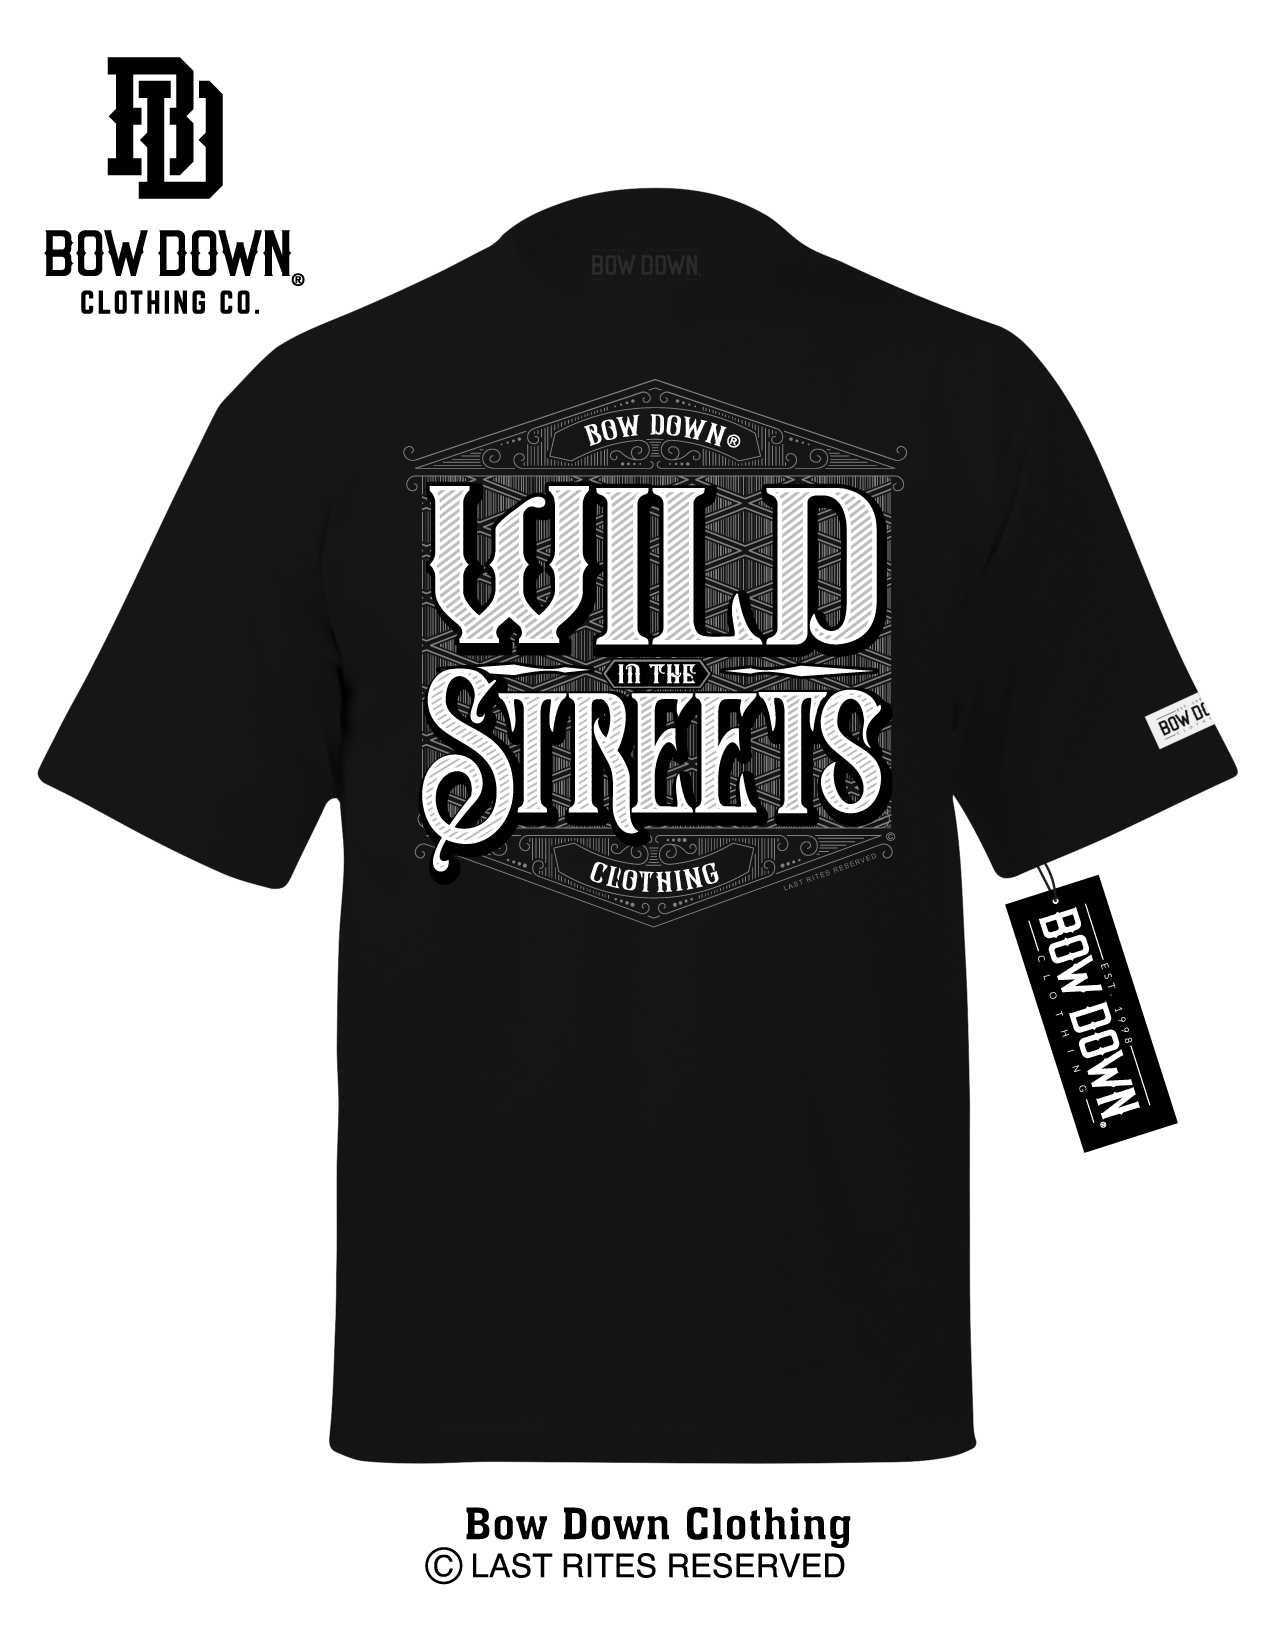 Wild In The Streets